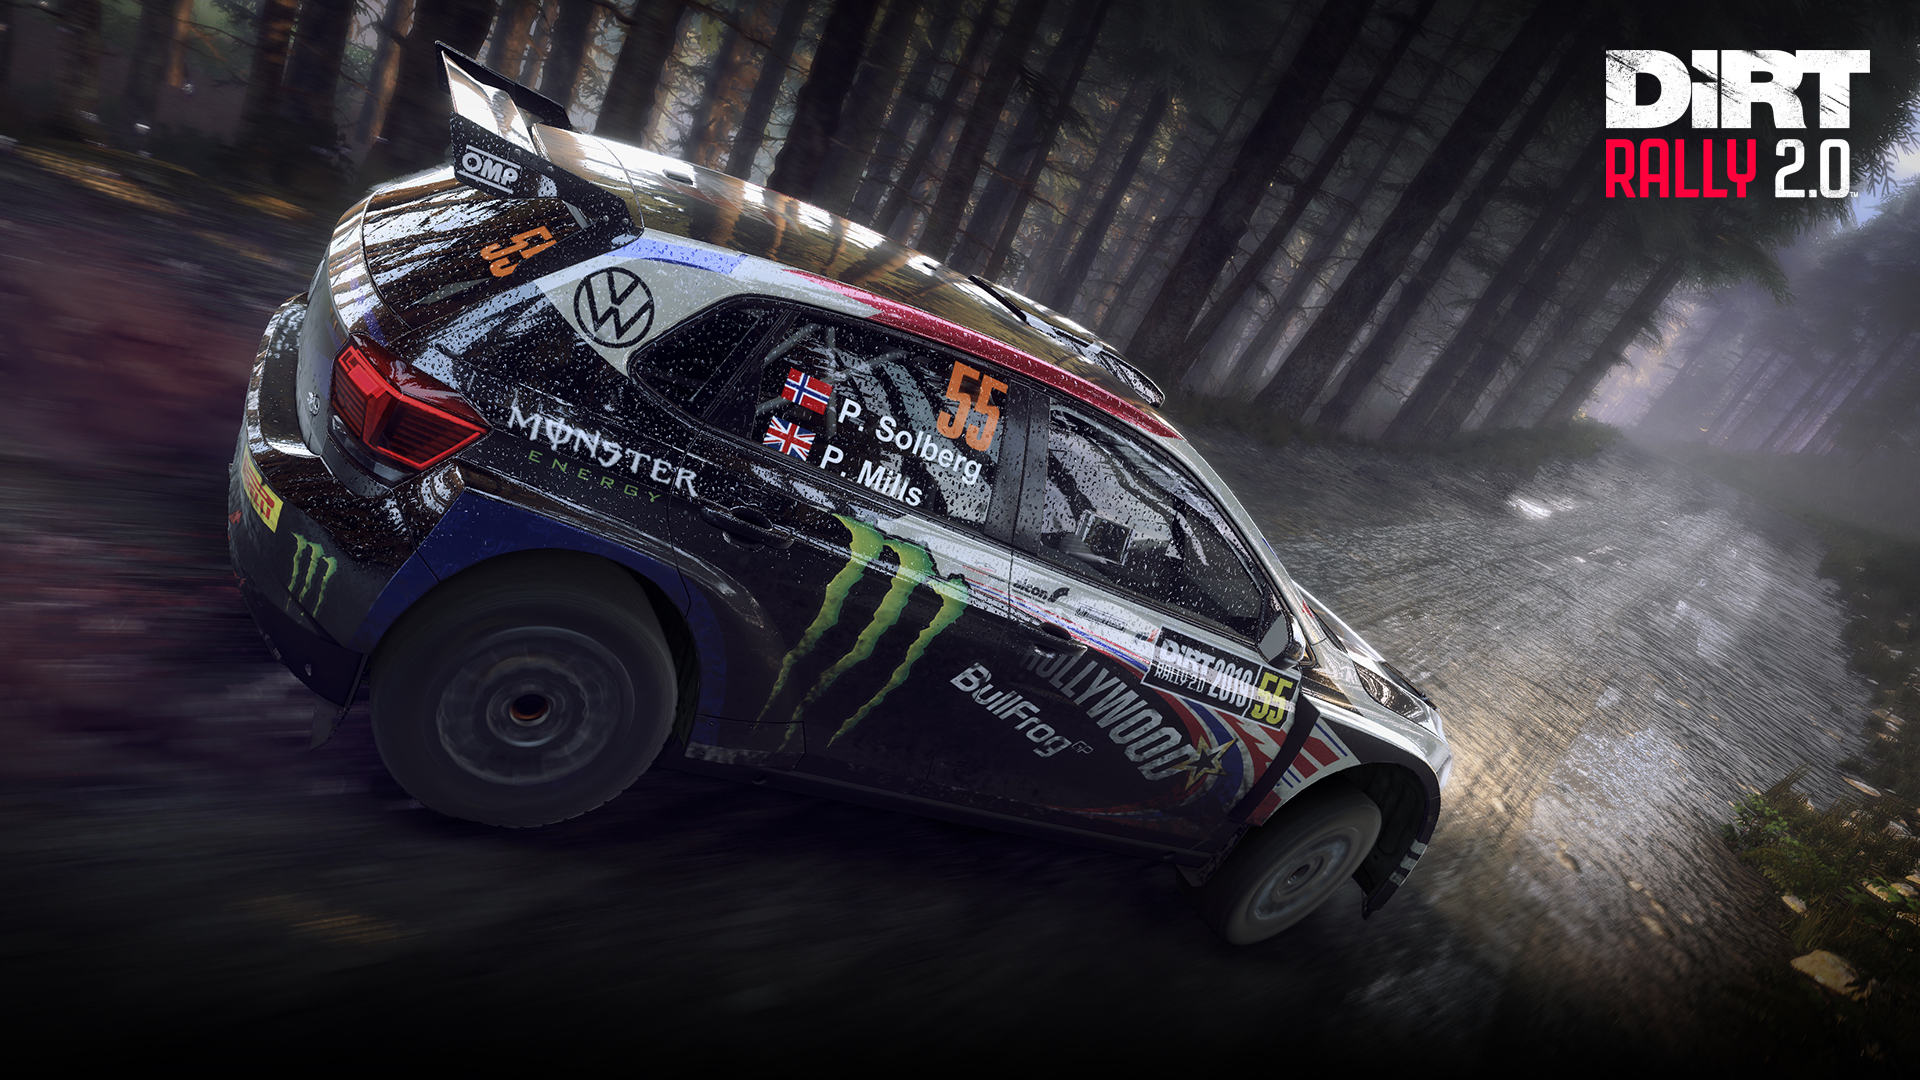 DiRT Rally 2.0 Patch 1.14 Available Today - Patch Notes Here